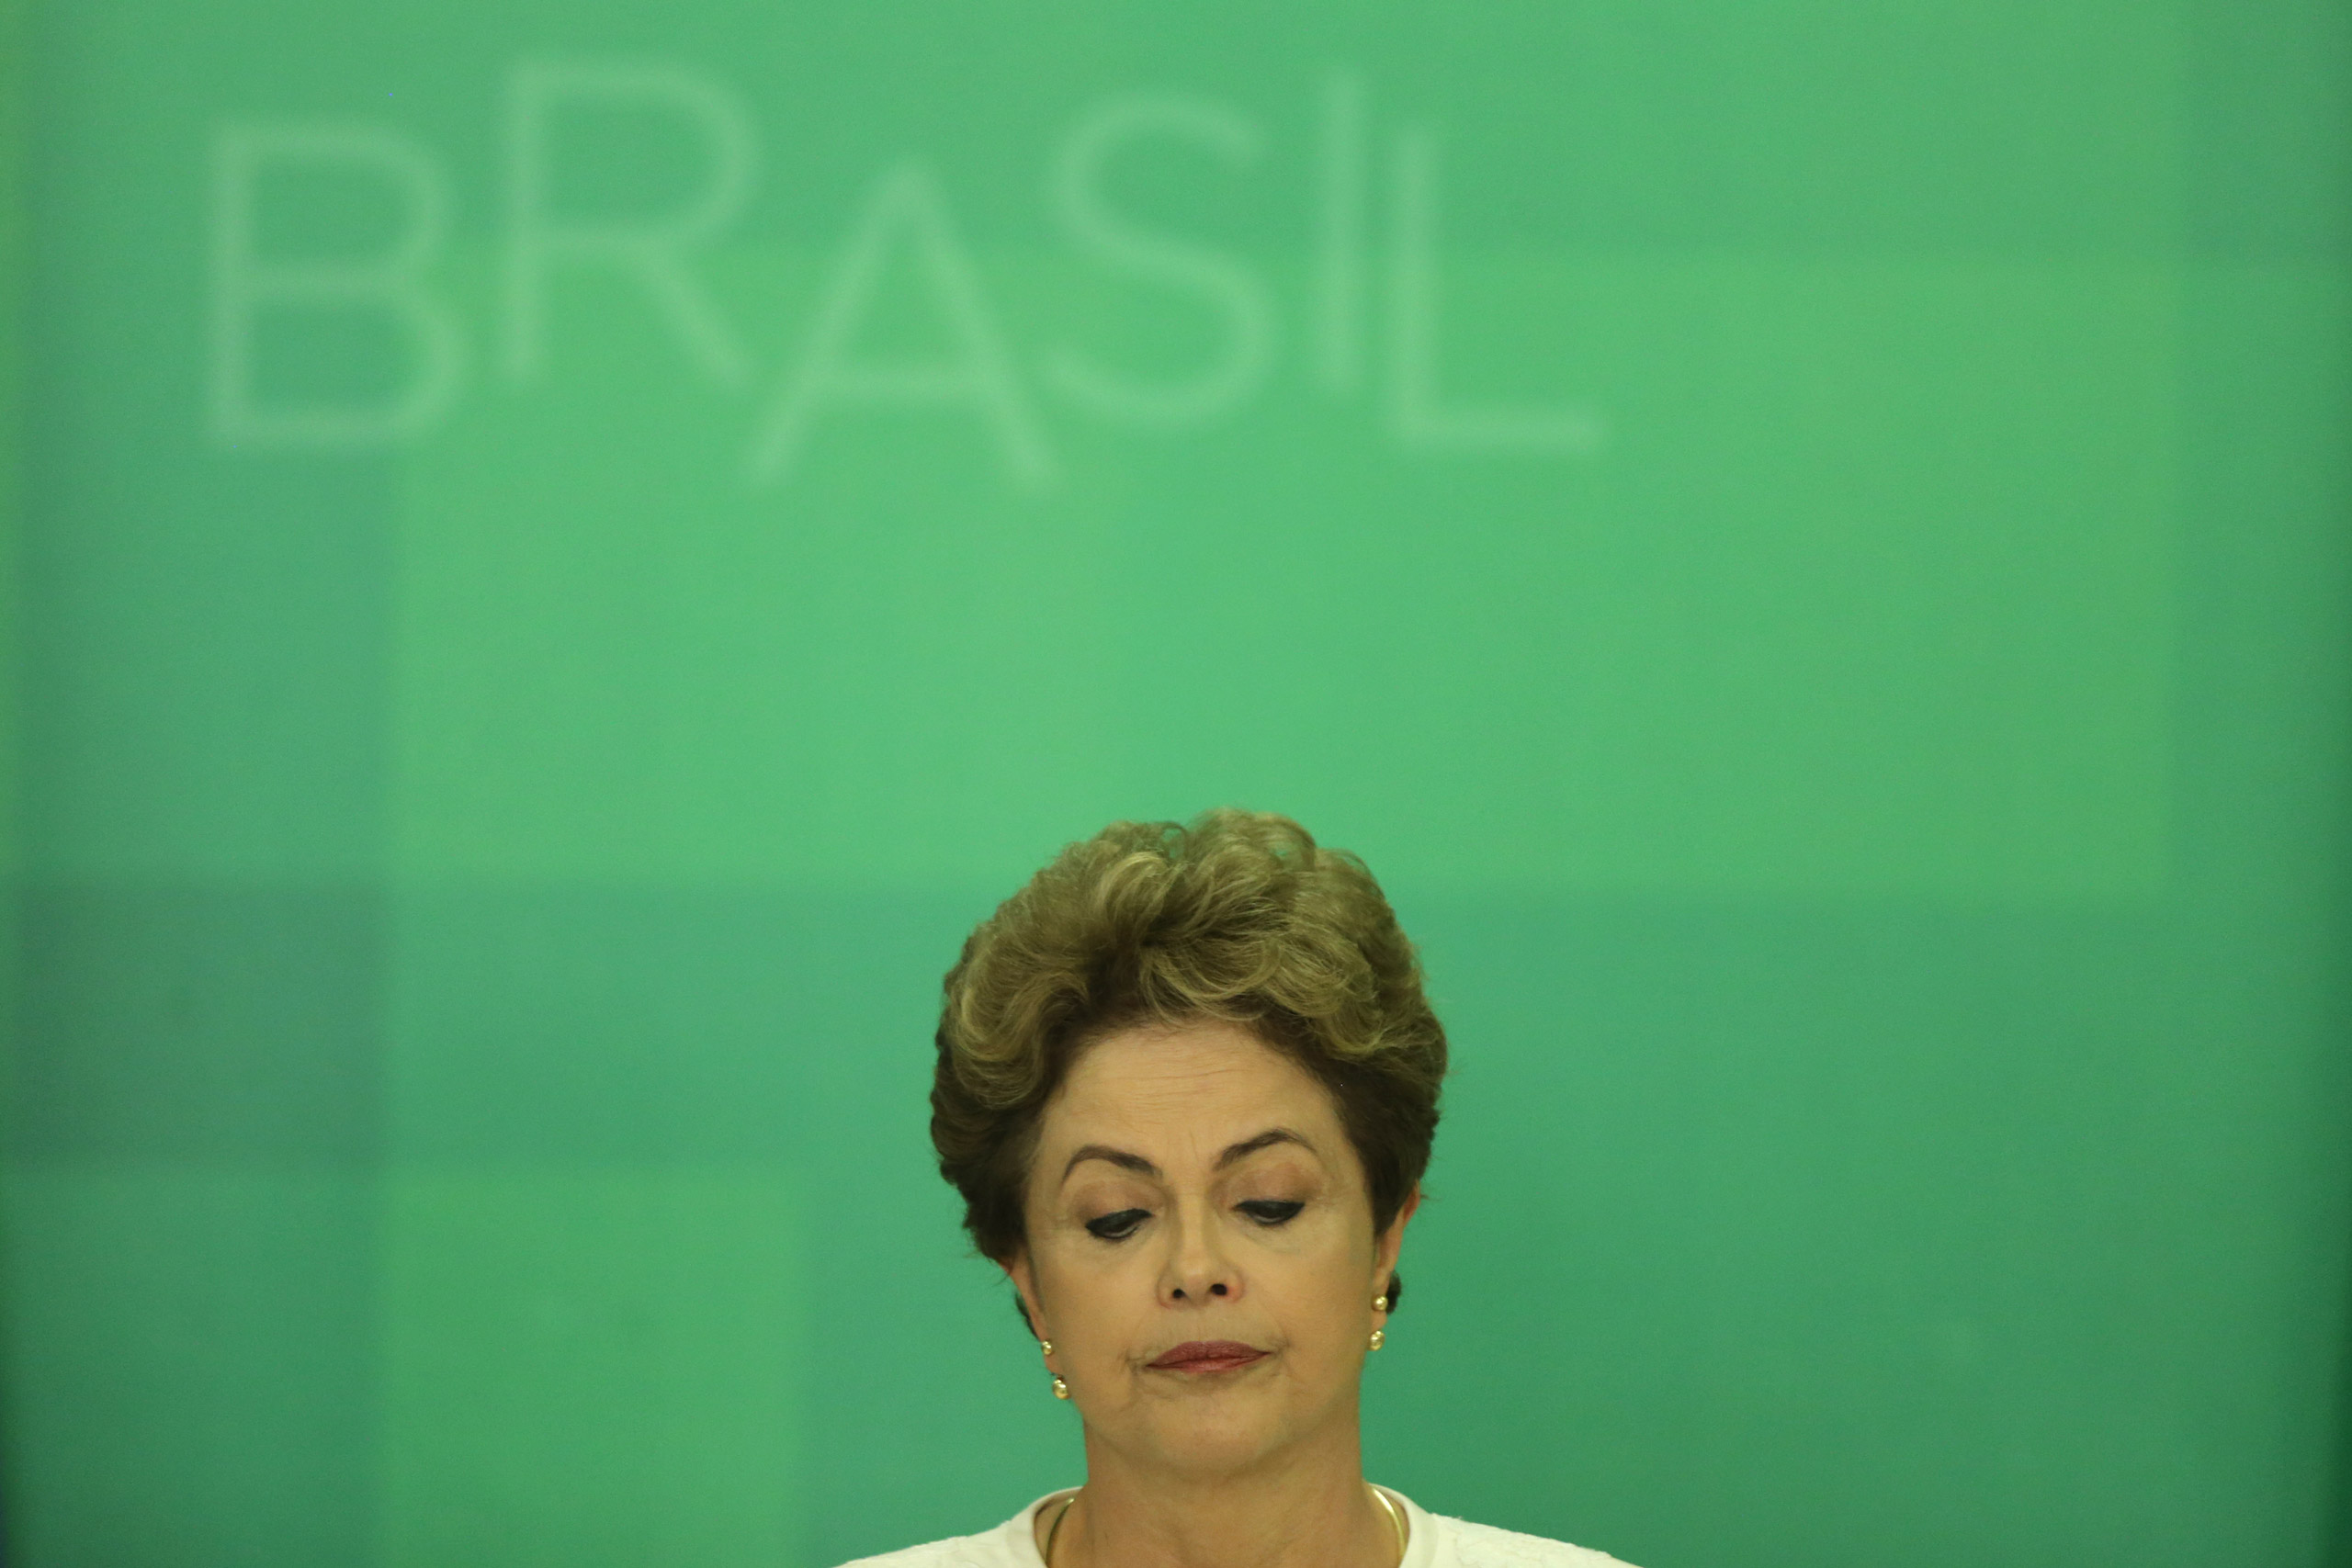 Brazil's President Dilma Rousseff during a press conference after impeachment proceedings were opened against her by the President of Chamber of Deputies Eduardo Cunha, at the Planalto Presidential Palace in Brasilia on Dec. 2, 2015. (Eraldo Peres—AP)